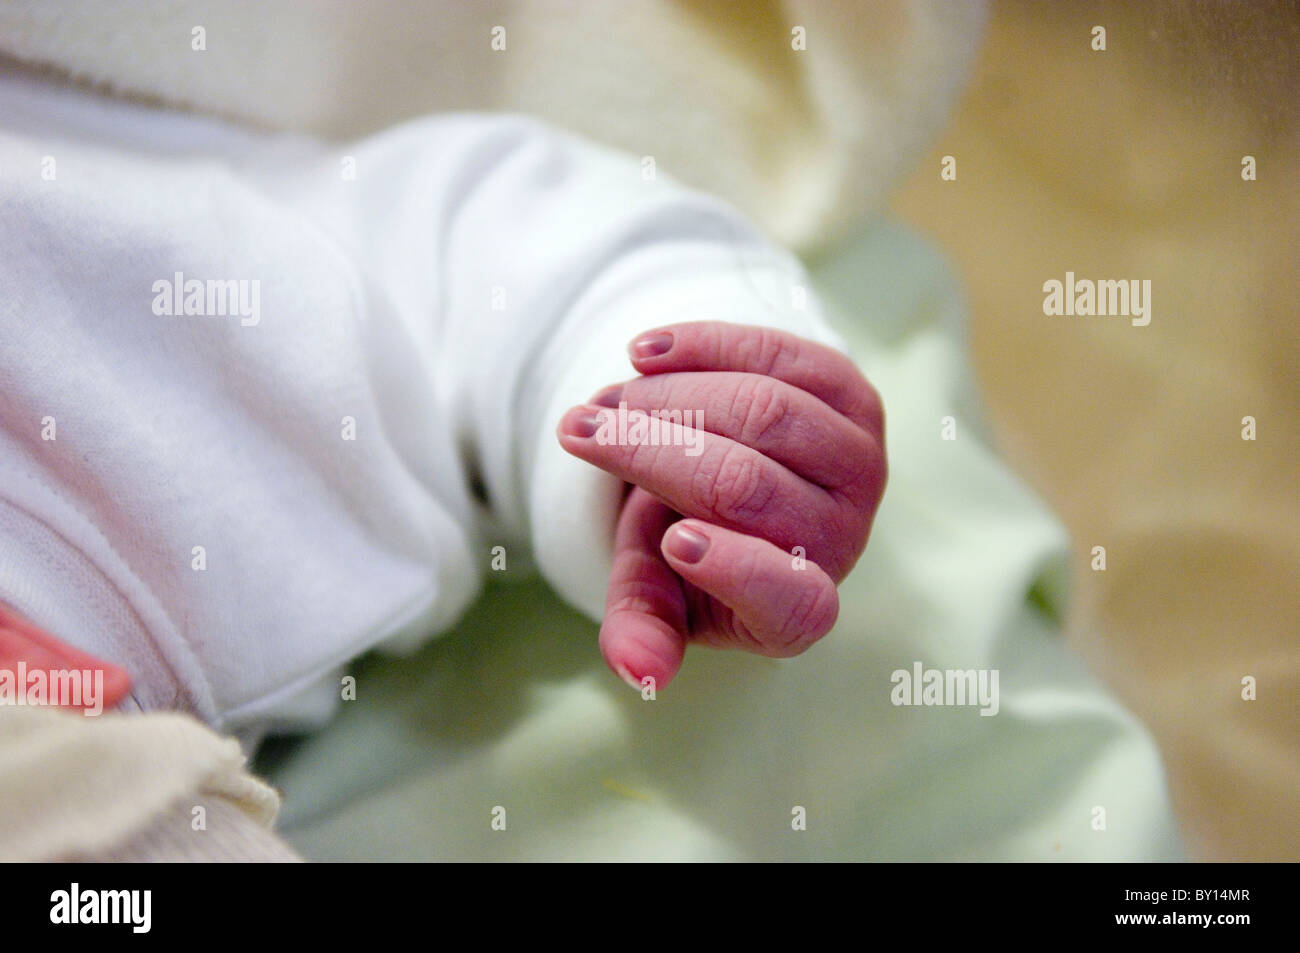 Wrinkled human baby hand shortly after being born. Stock Photo